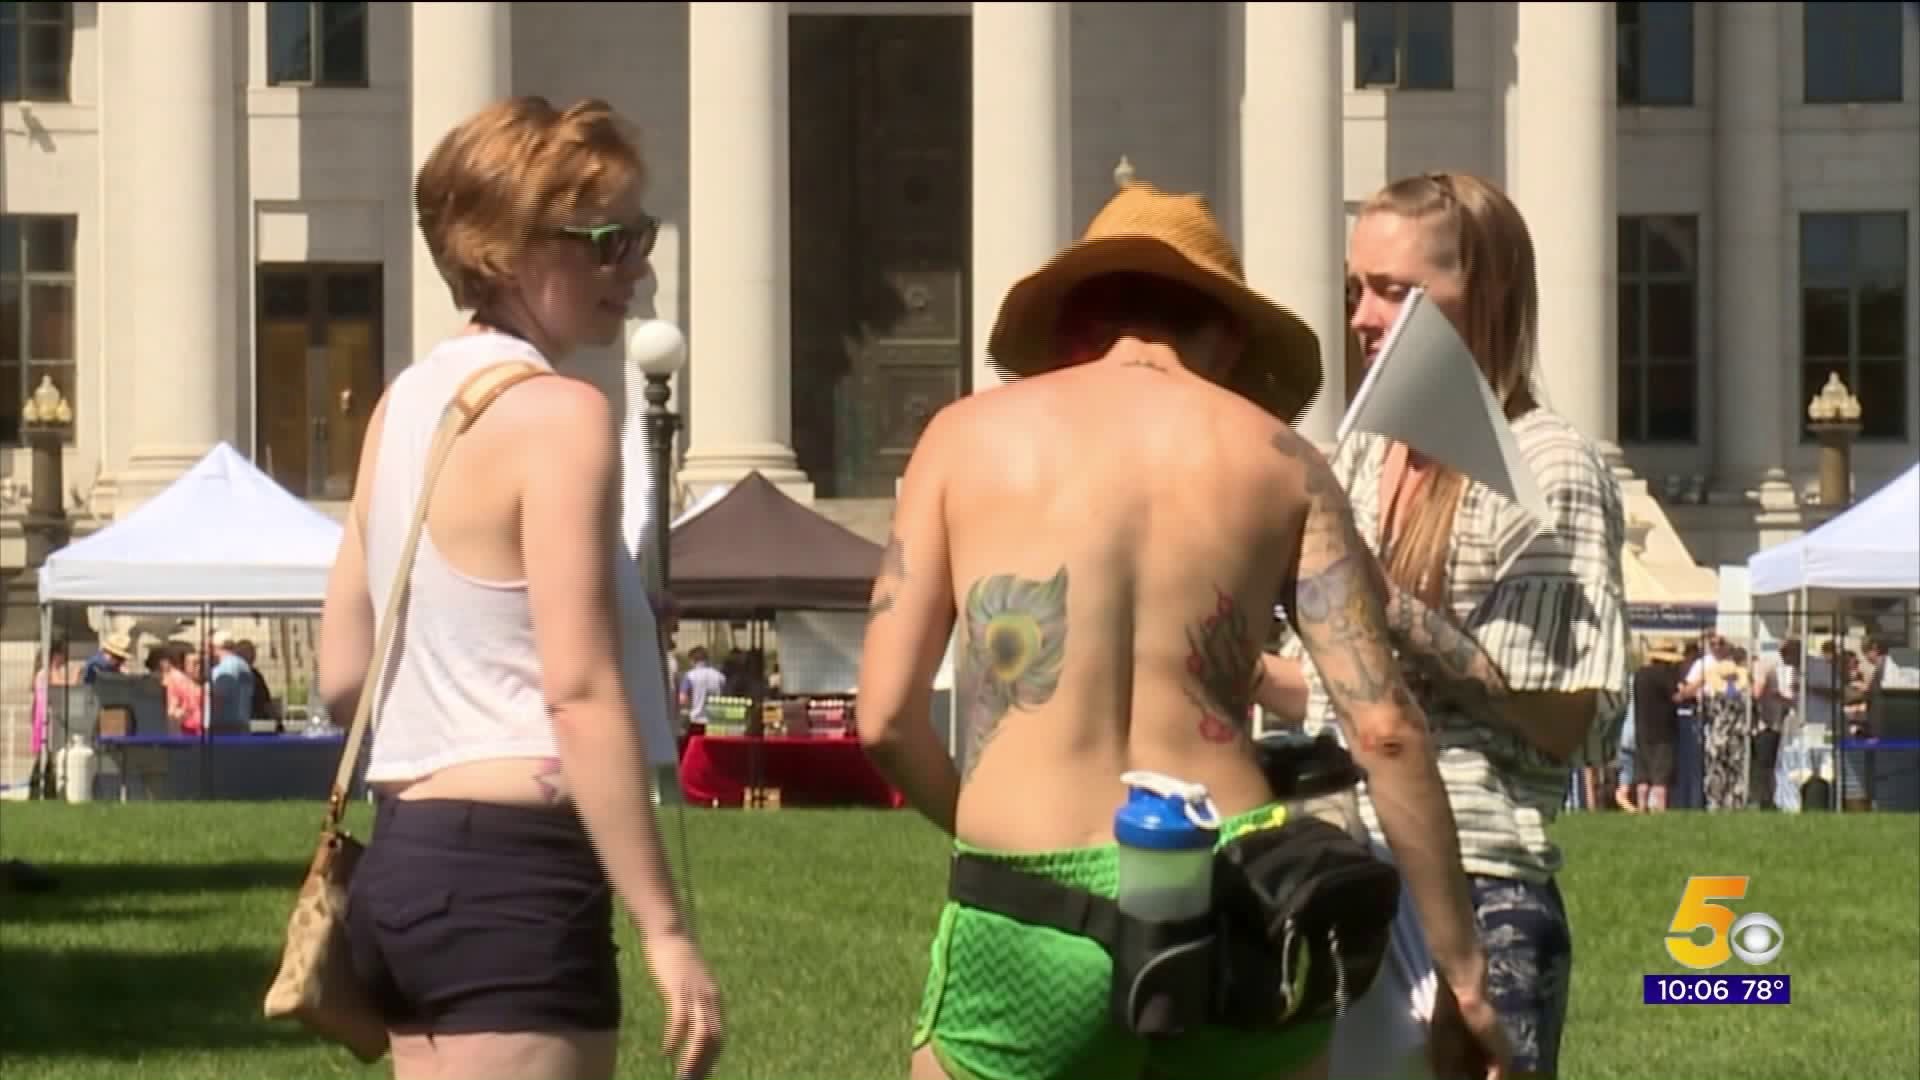 Oklahoma City Police To Still Enforce Ban On Topless Women In Public